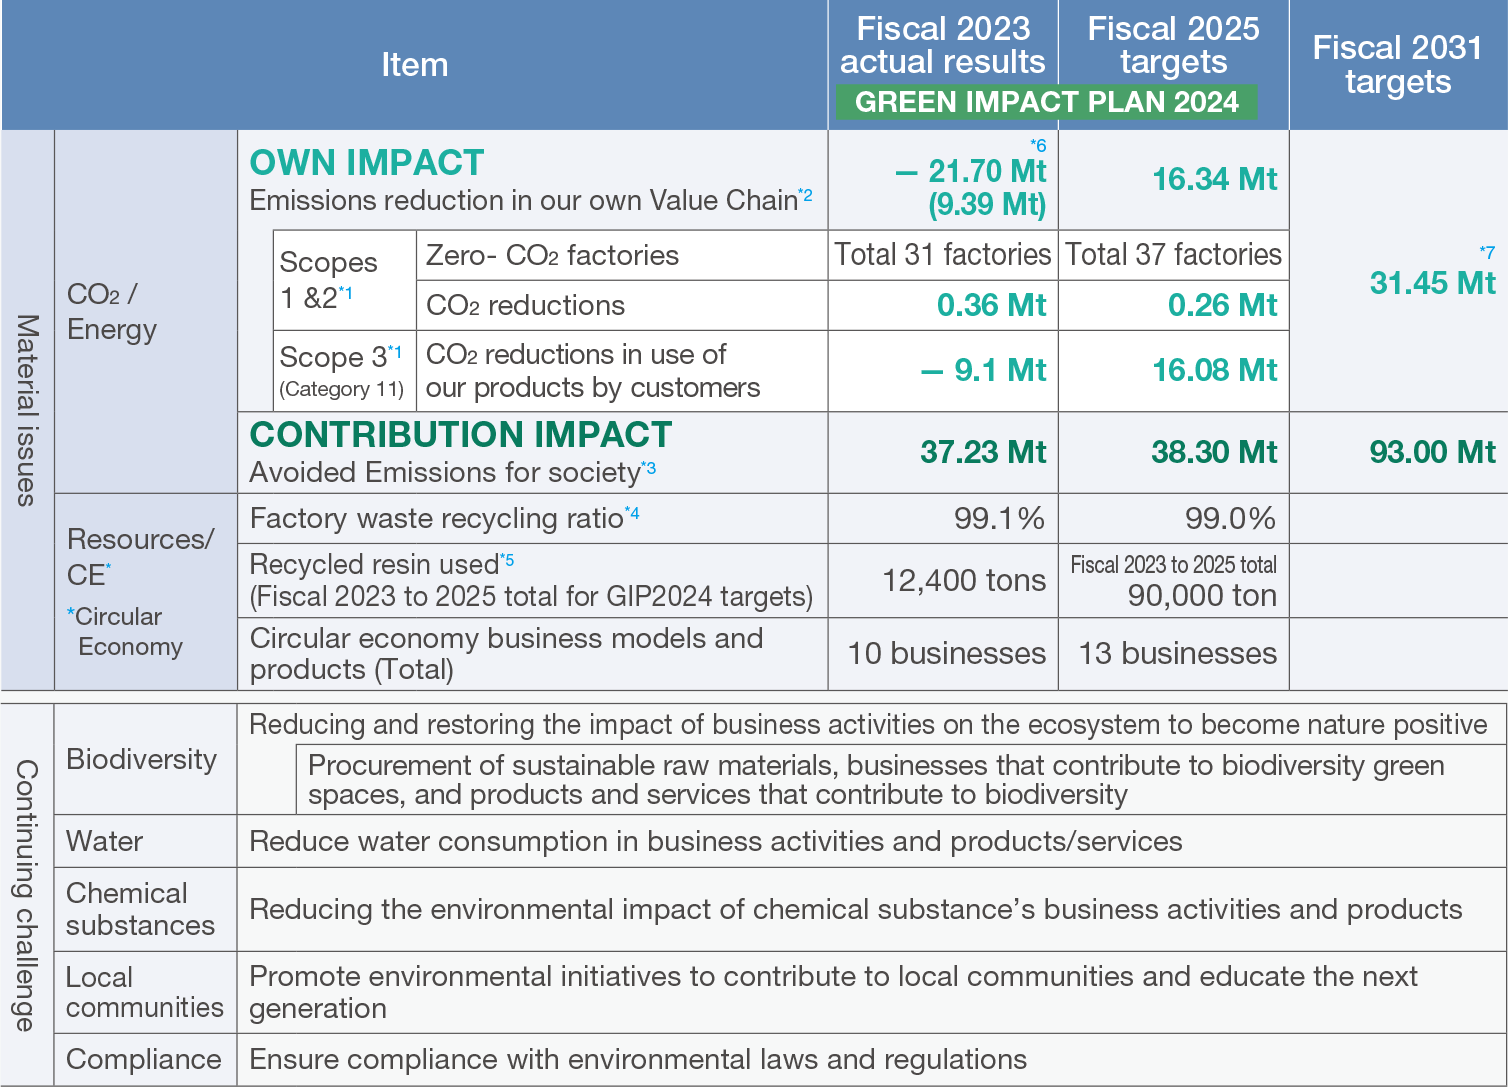 GREEN IMPACT PLAN 2024 and Fiscal 2031 Targets